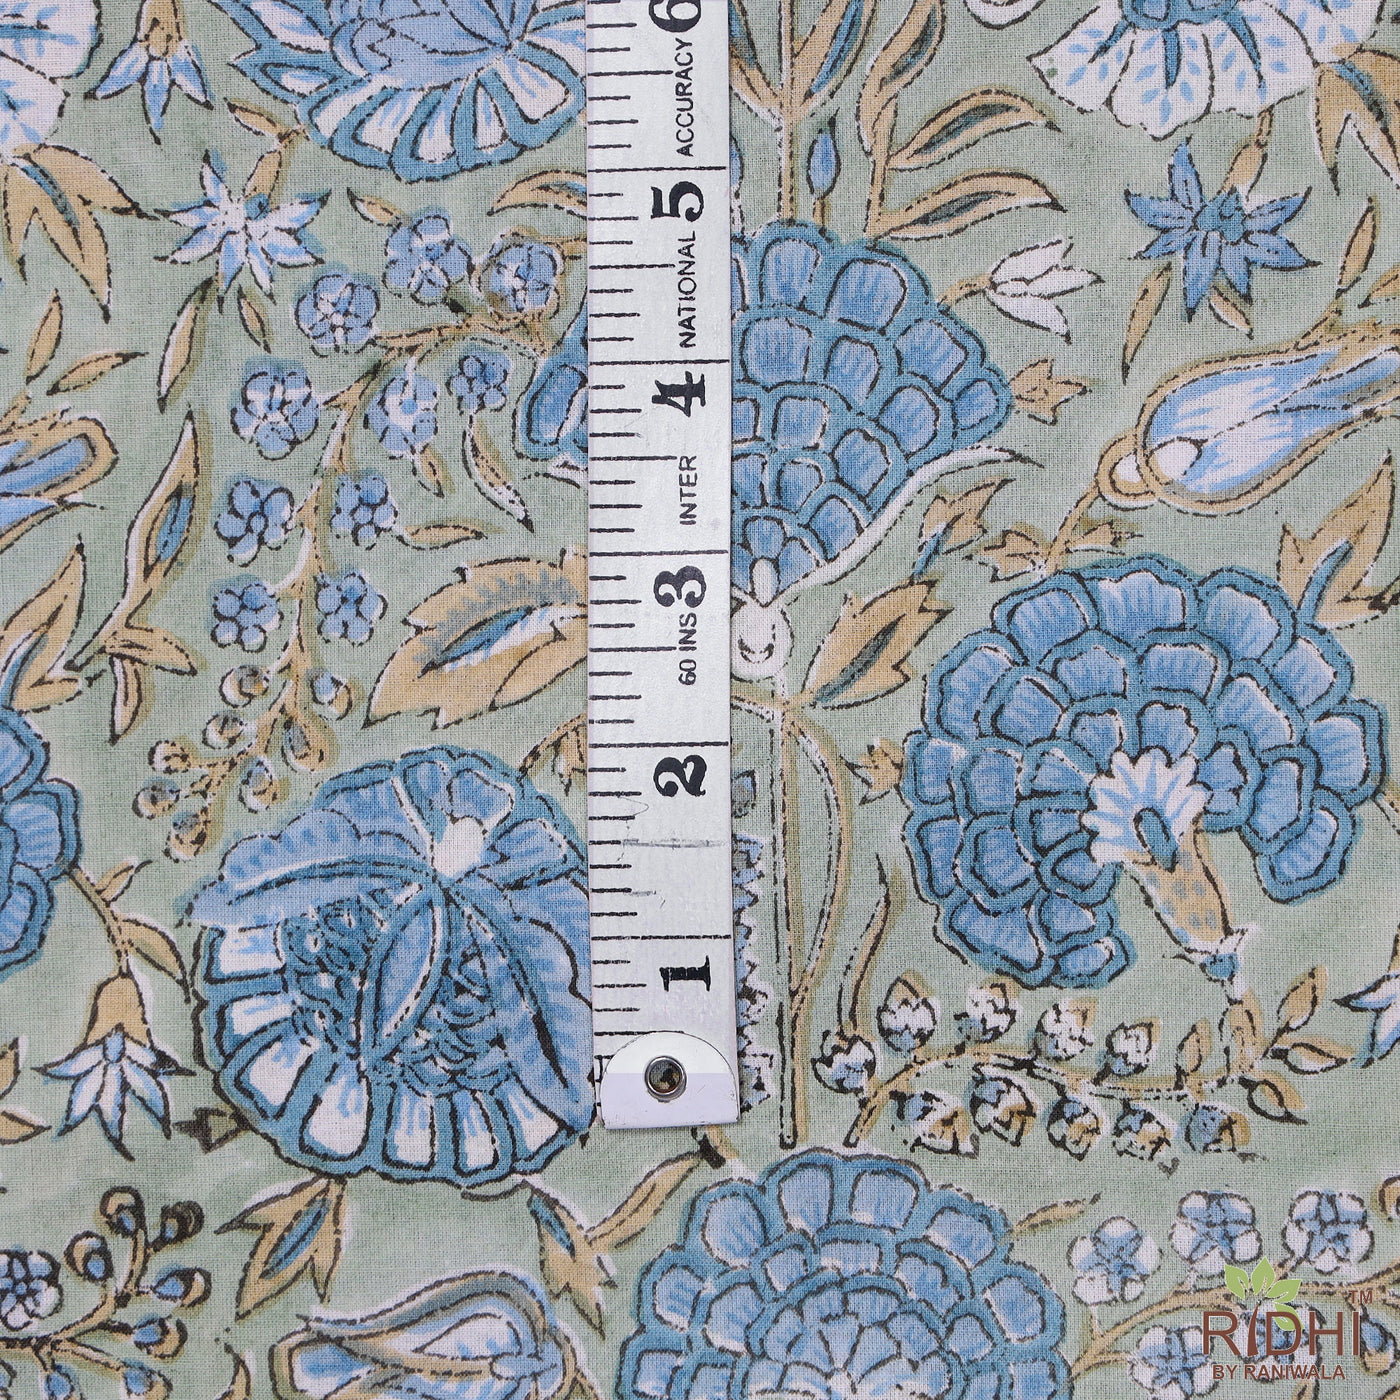 Fabricrush Asparagus Green, Air Force Blue Indian Hand Block Printed Floral 100% Pure Cotton Cloth, Fabric by the yard, Fabric for curtains Dresses Bag